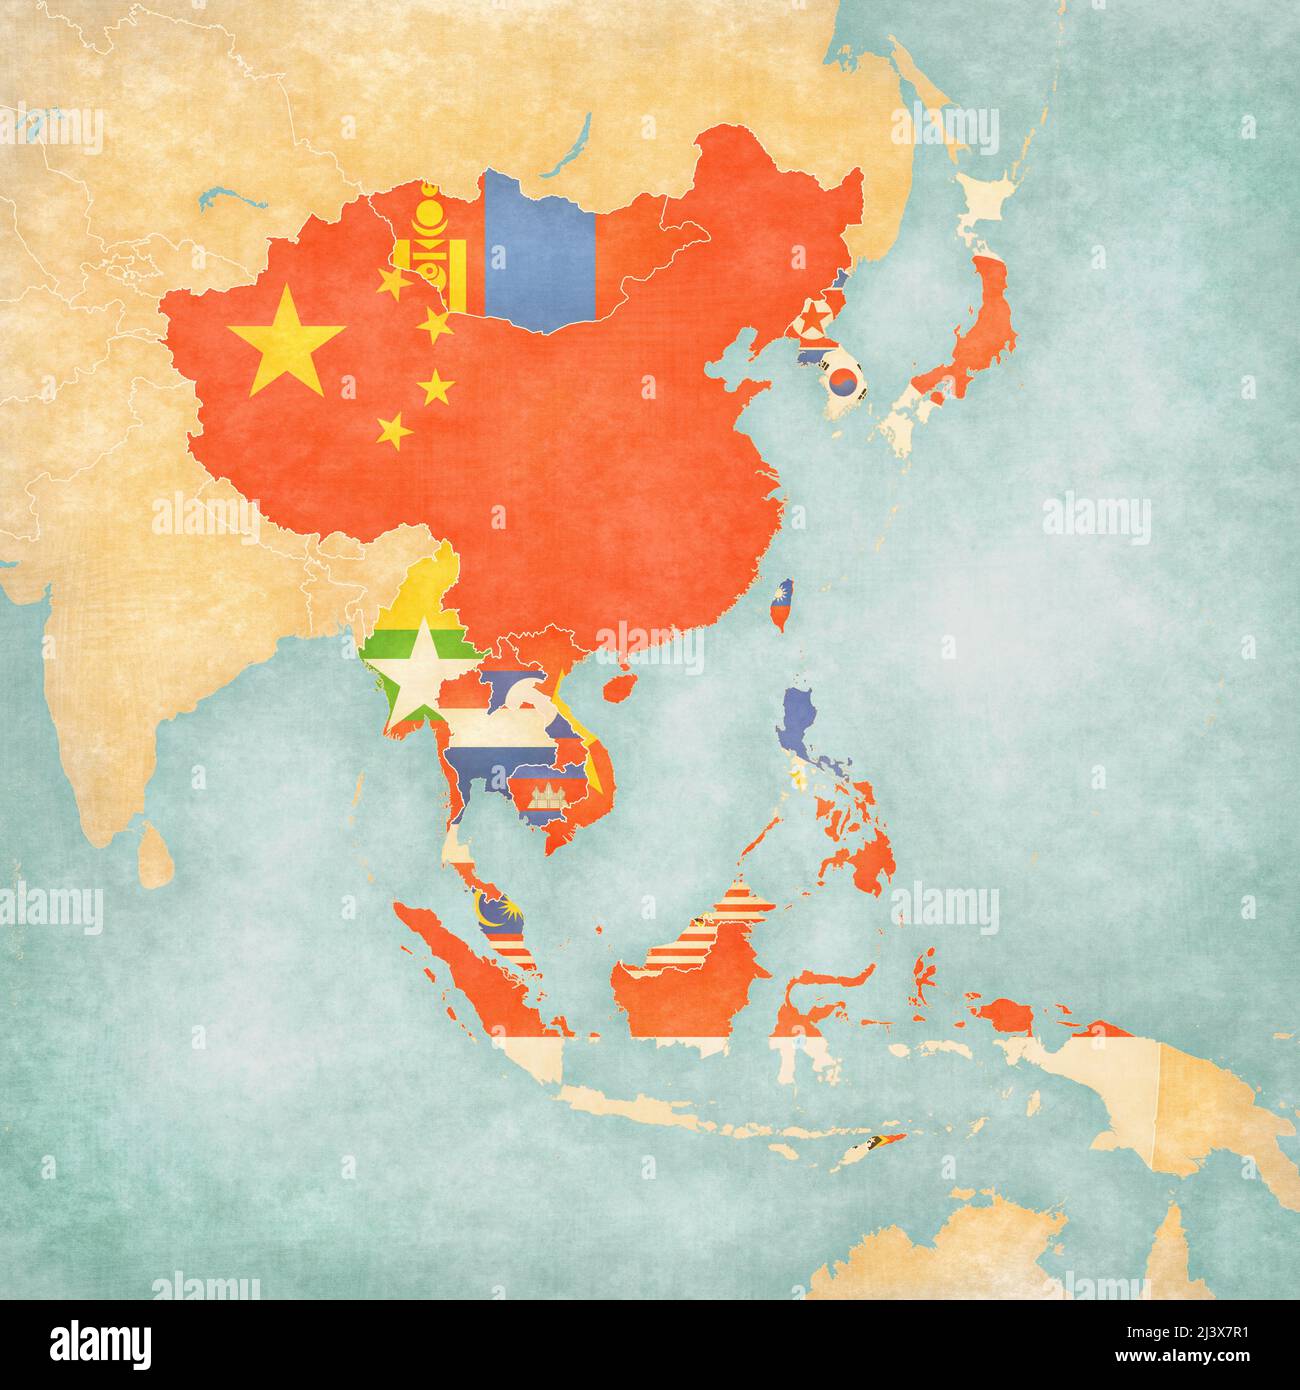 Flags of all countries on the map of East and Southeast Asia in soft grunge and vintage style, like old paper with watercolor painting. Stock Photo